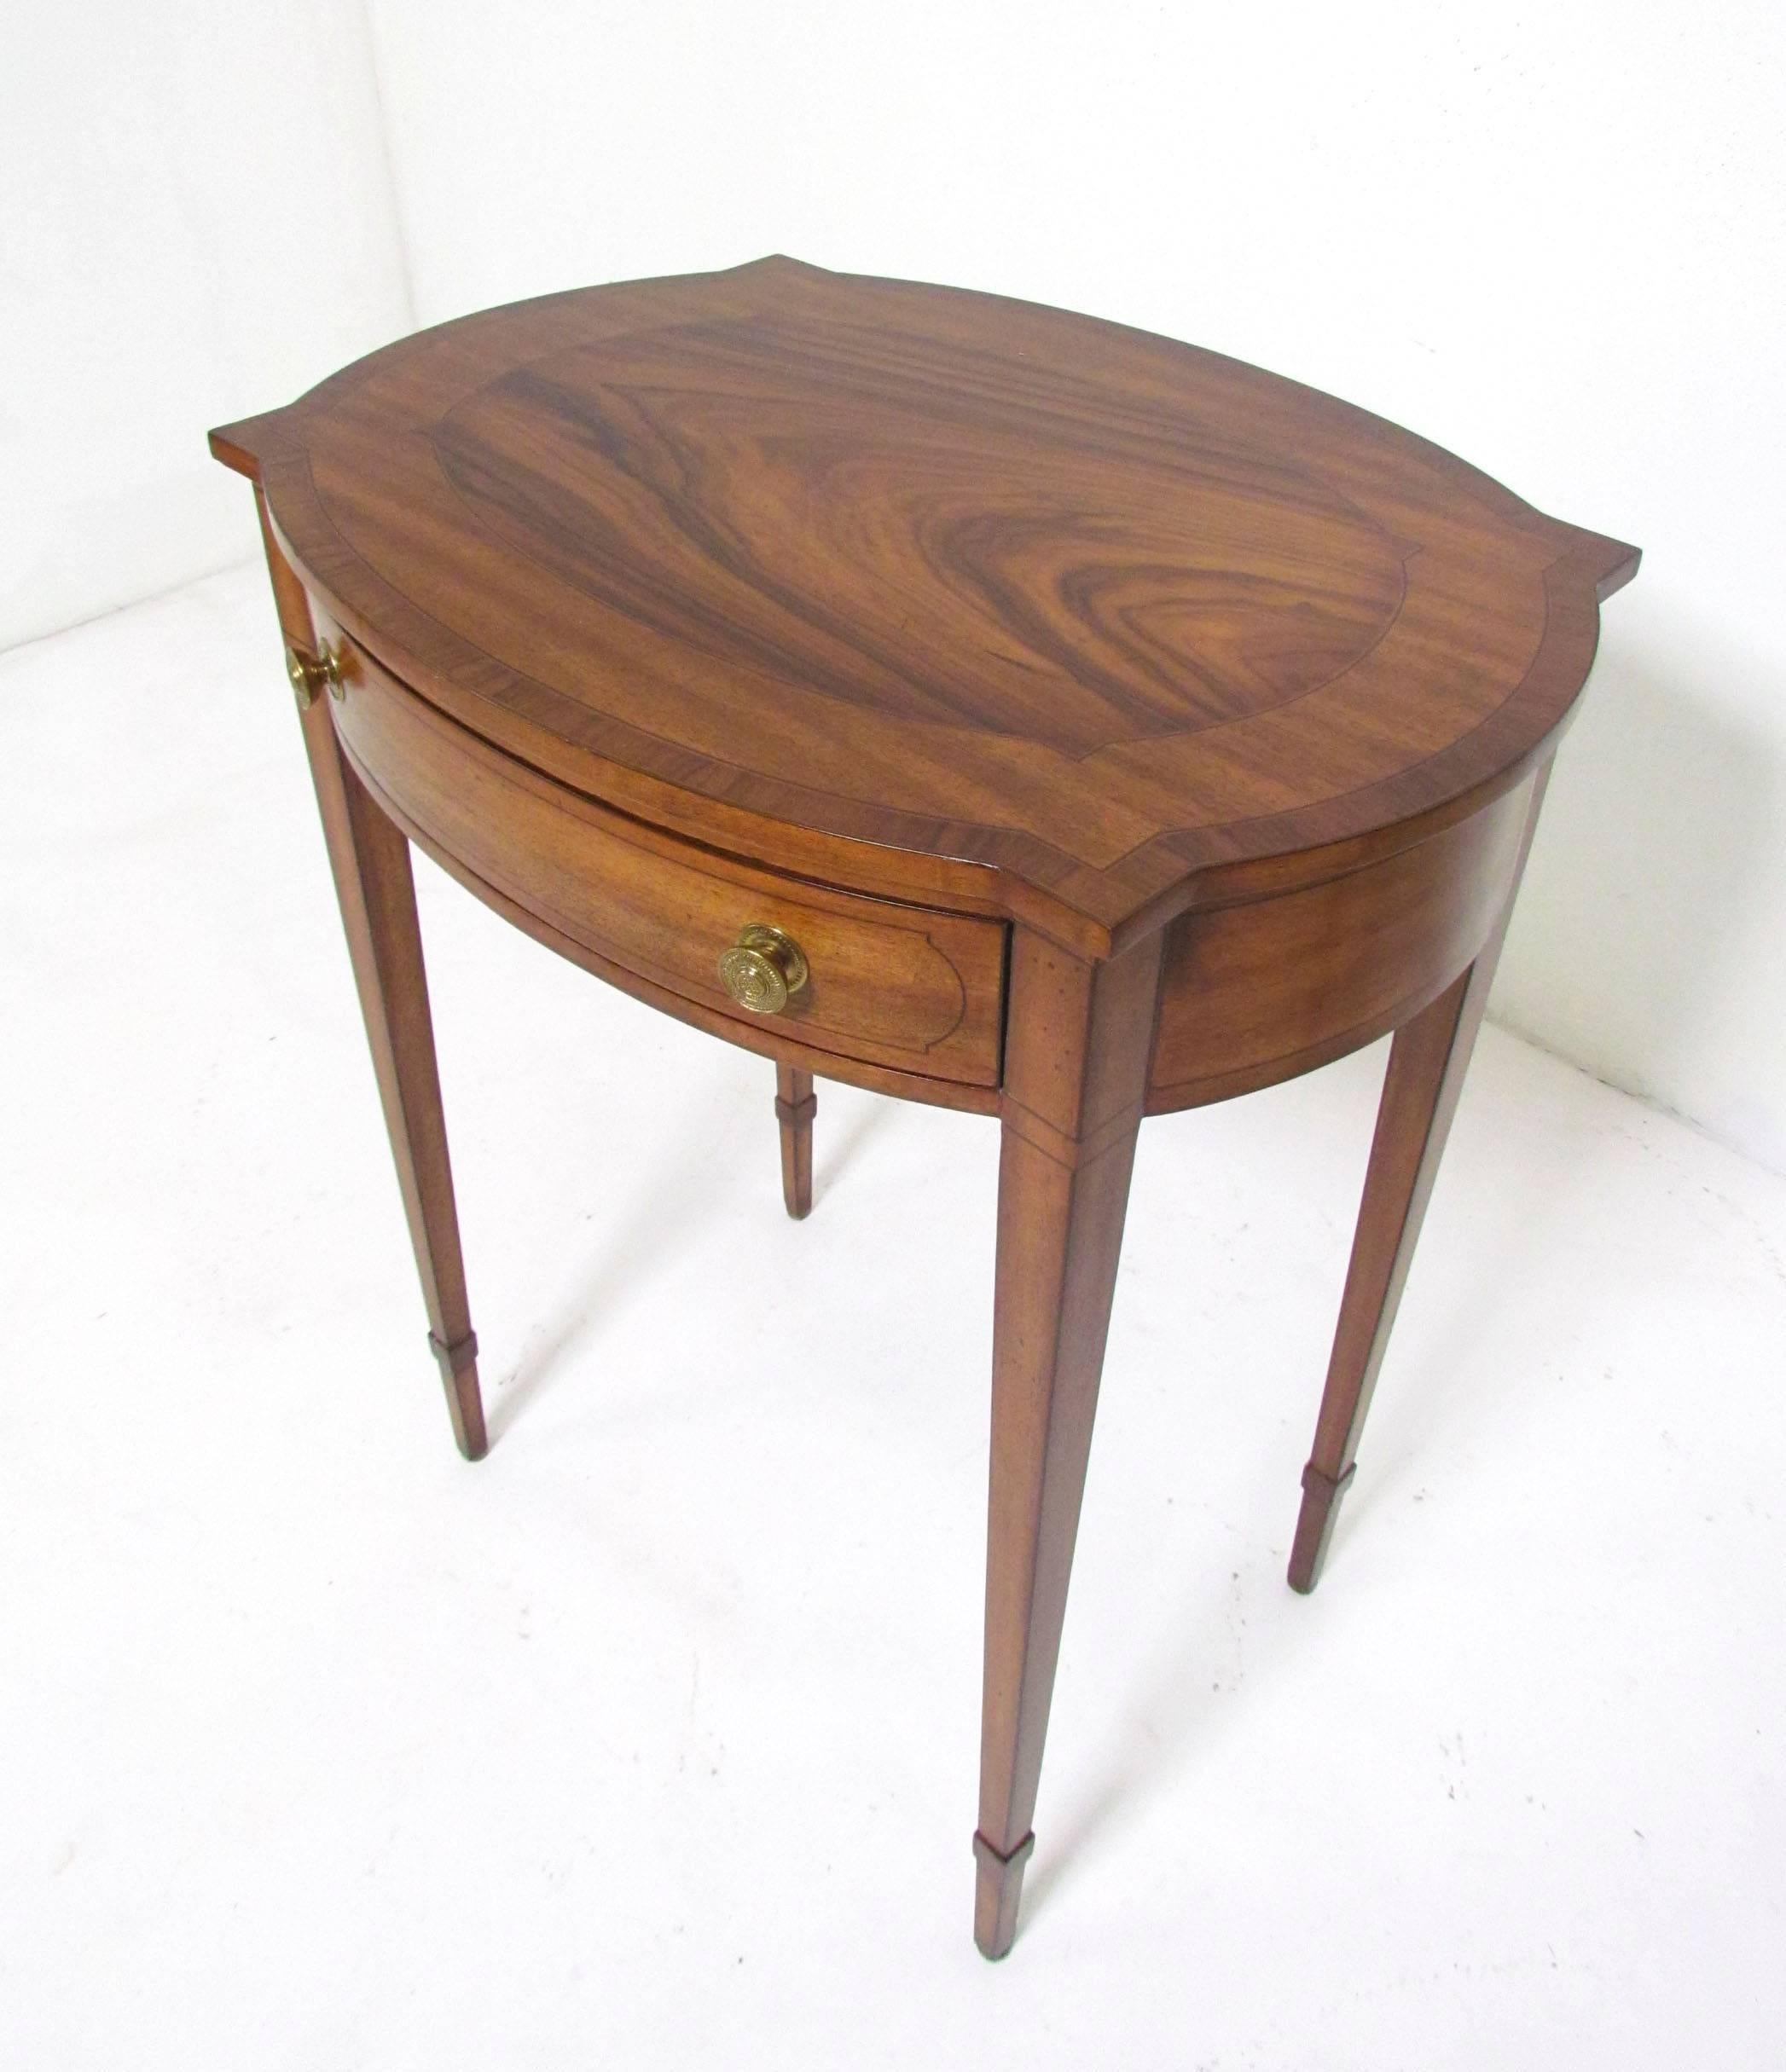 Philippine Pair of English Regency Style End Tables by Maitland-Smith